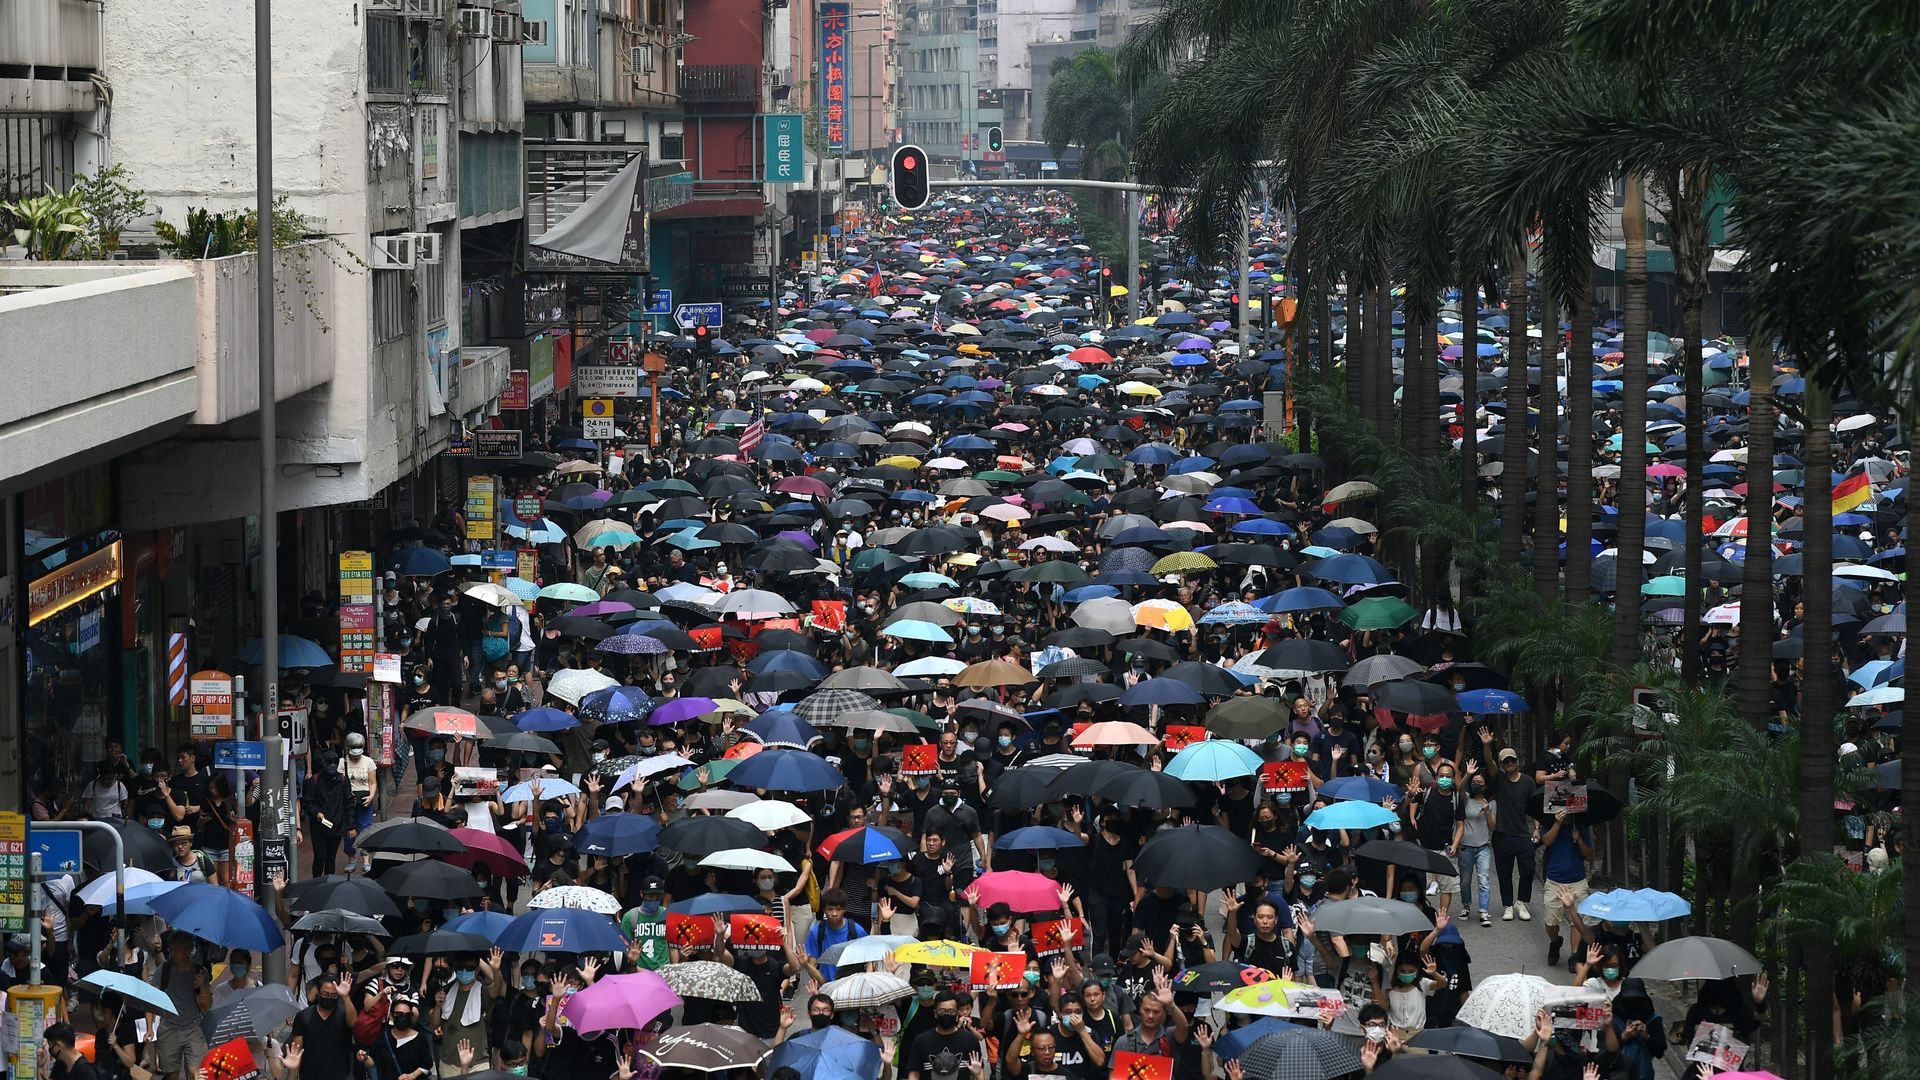 Thousands of people hold an unsanctioned march through the streets of Hong Kong 